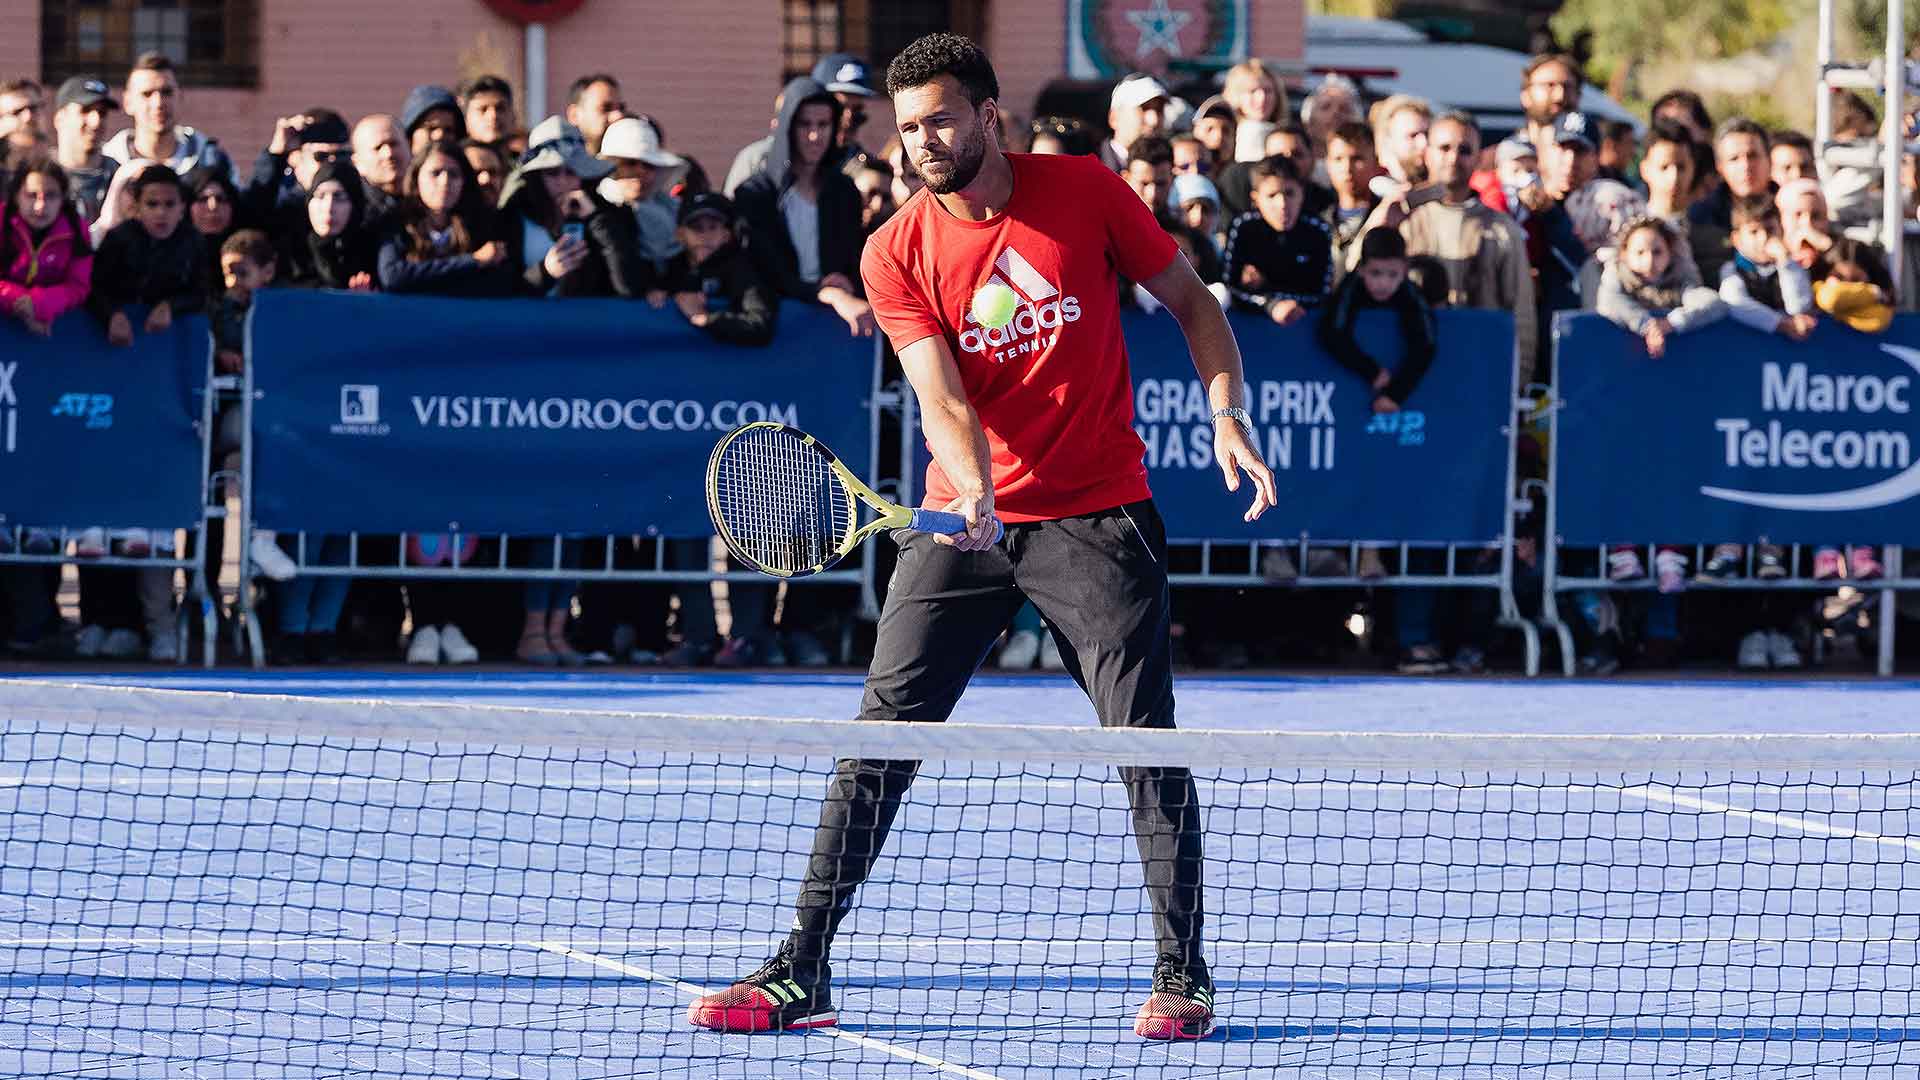 Jo-Wilfried Tsonga is a wild-card entry at the Grand Prix Hassan II in Marrakech